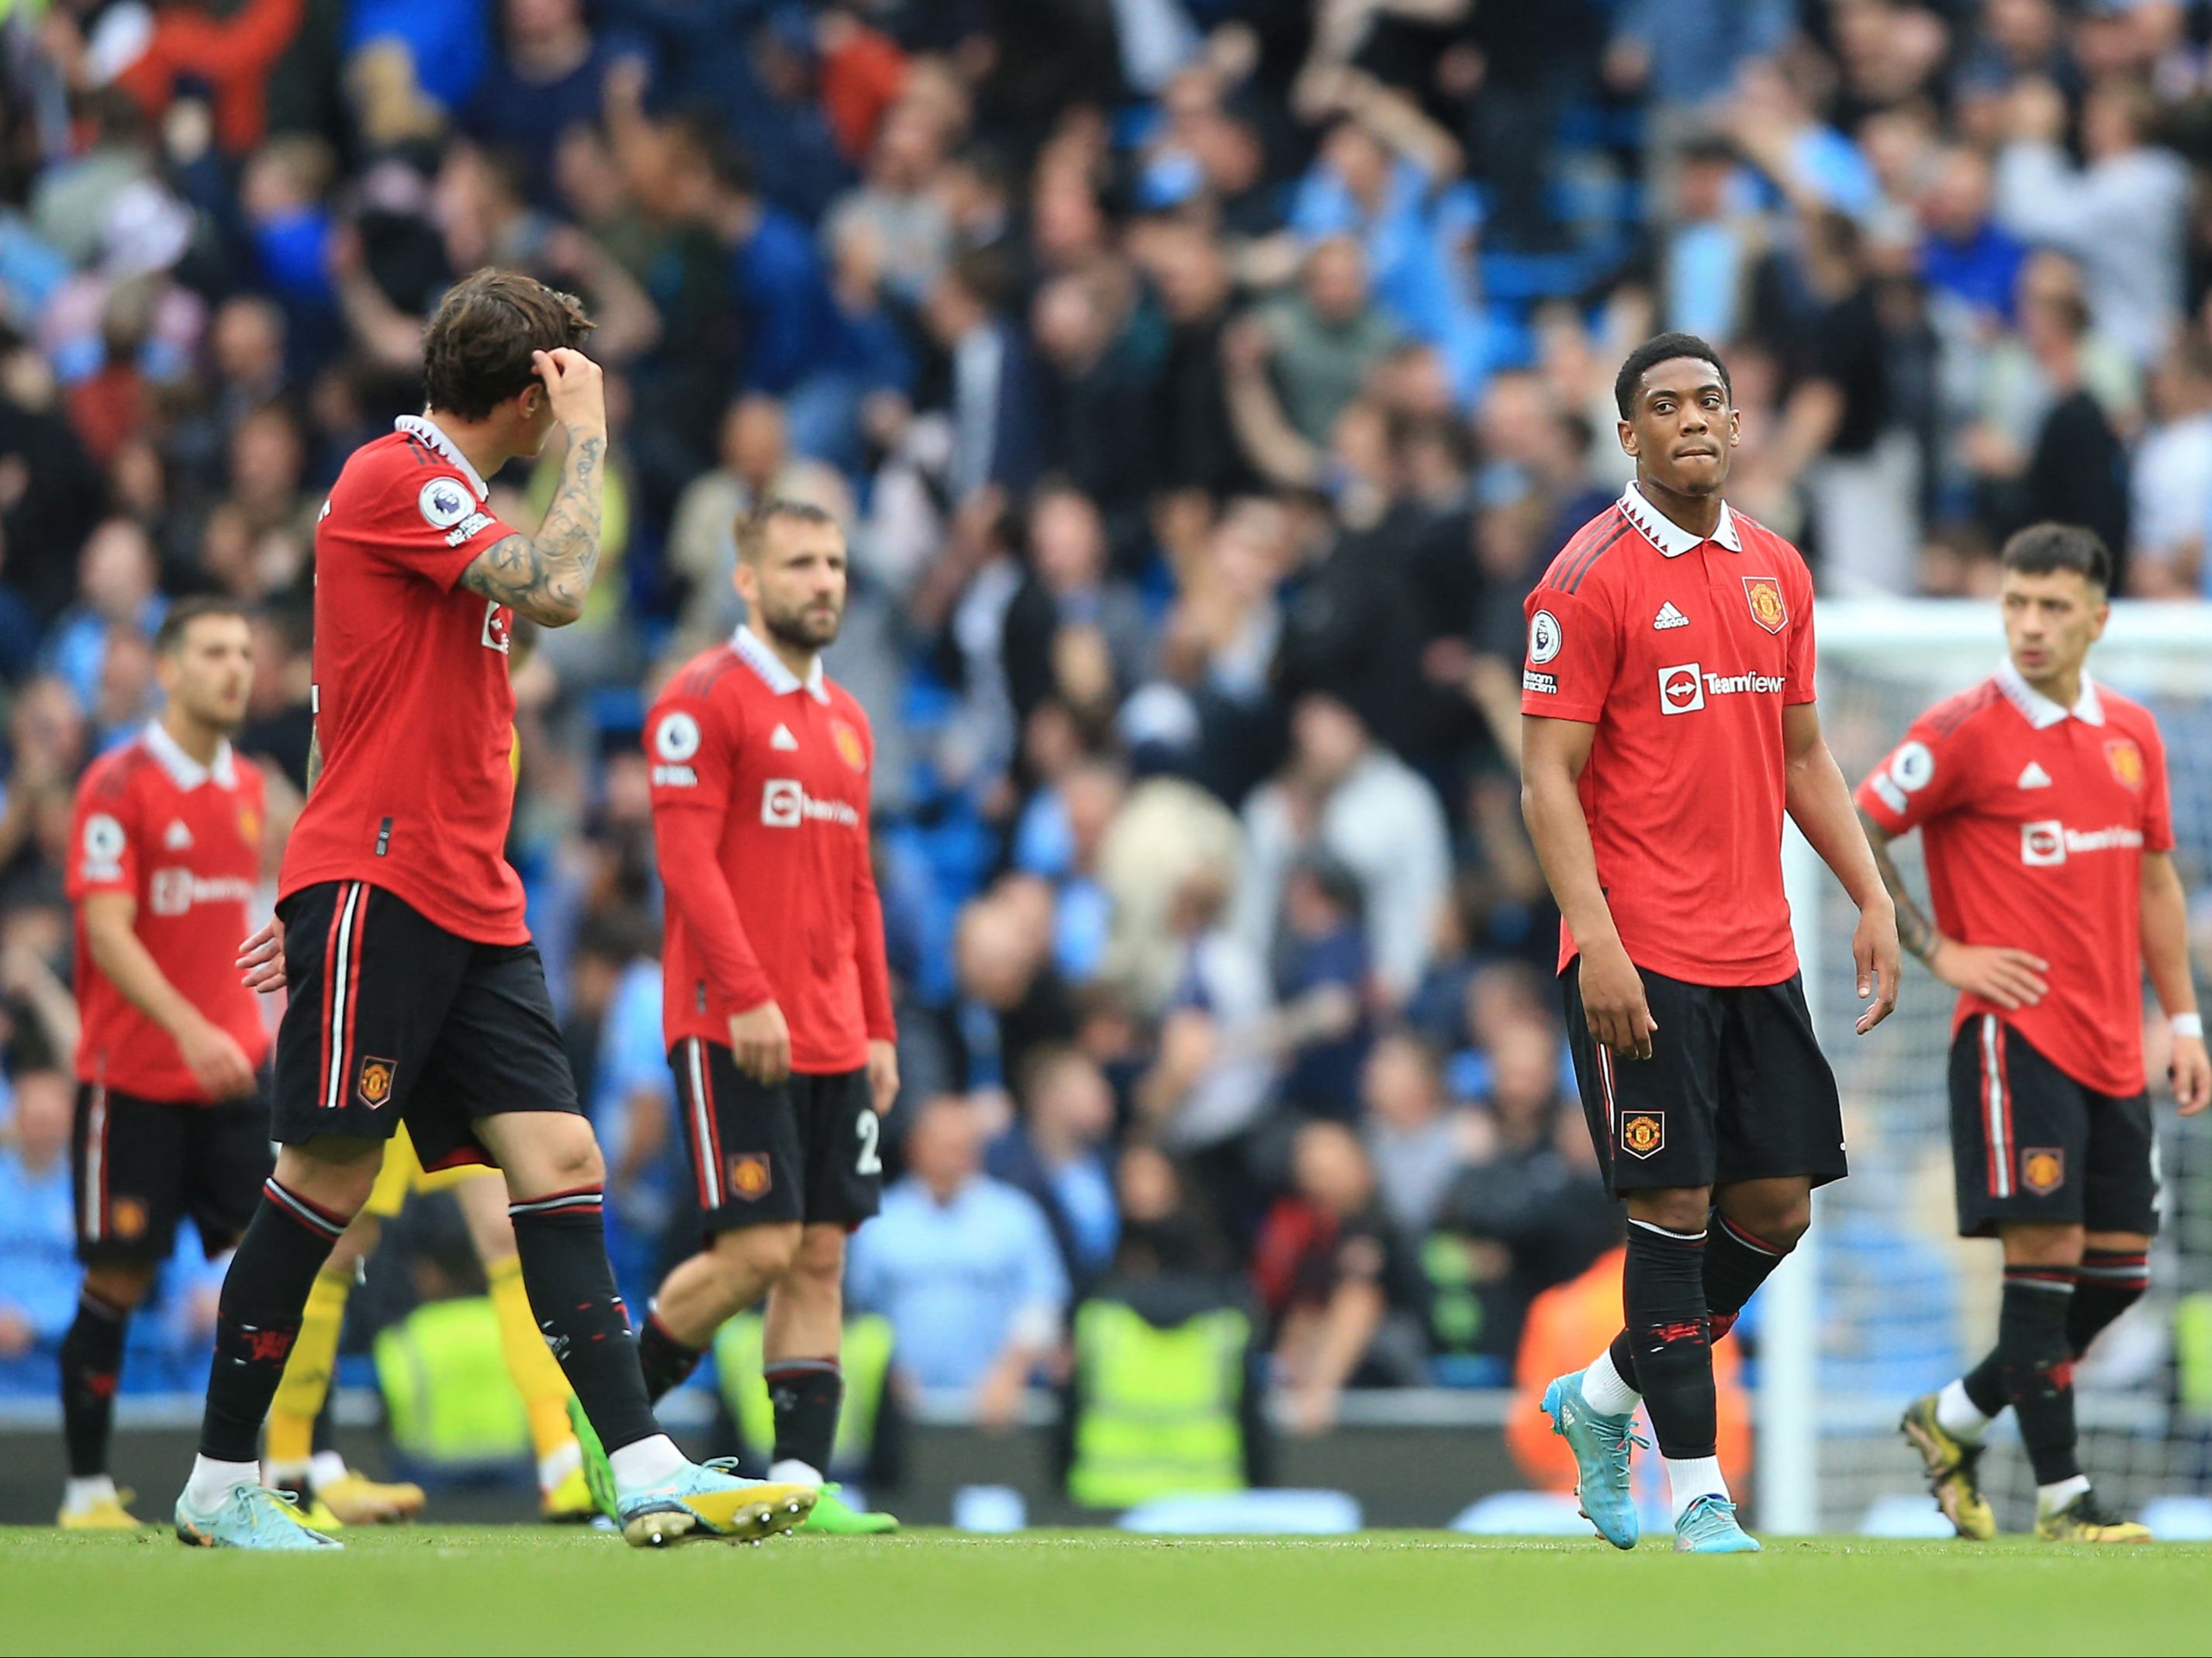 Manchester United players leave the pitch after Sunday’s derby